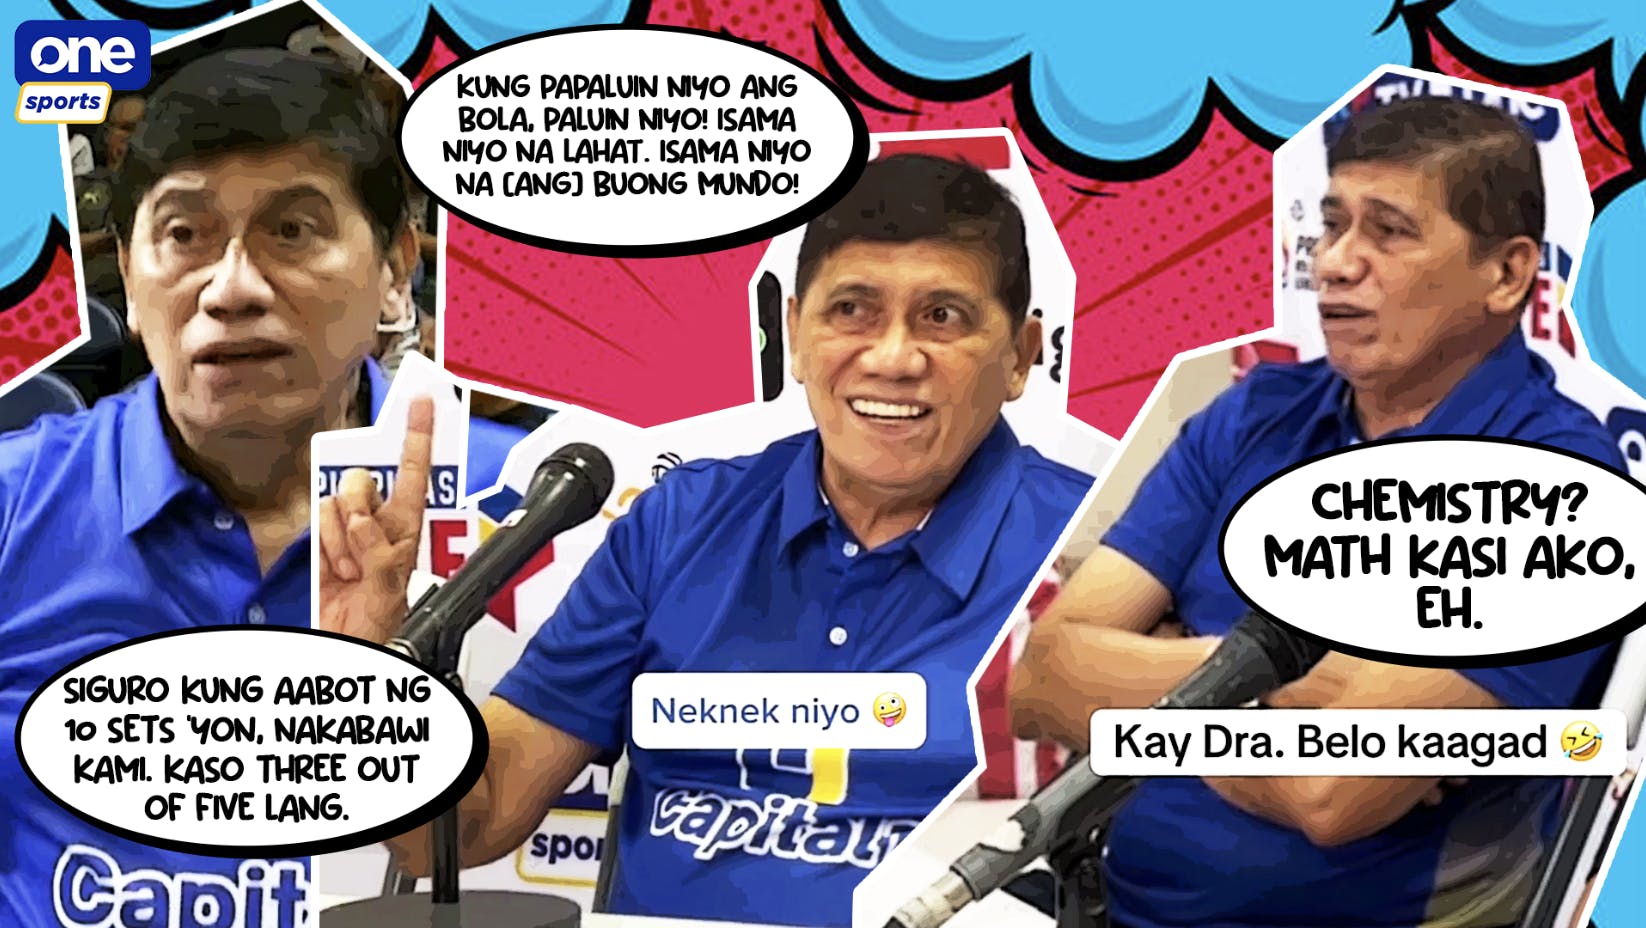 The most quotable quotes from coach Roger Gorayeb in his PVL return... so far